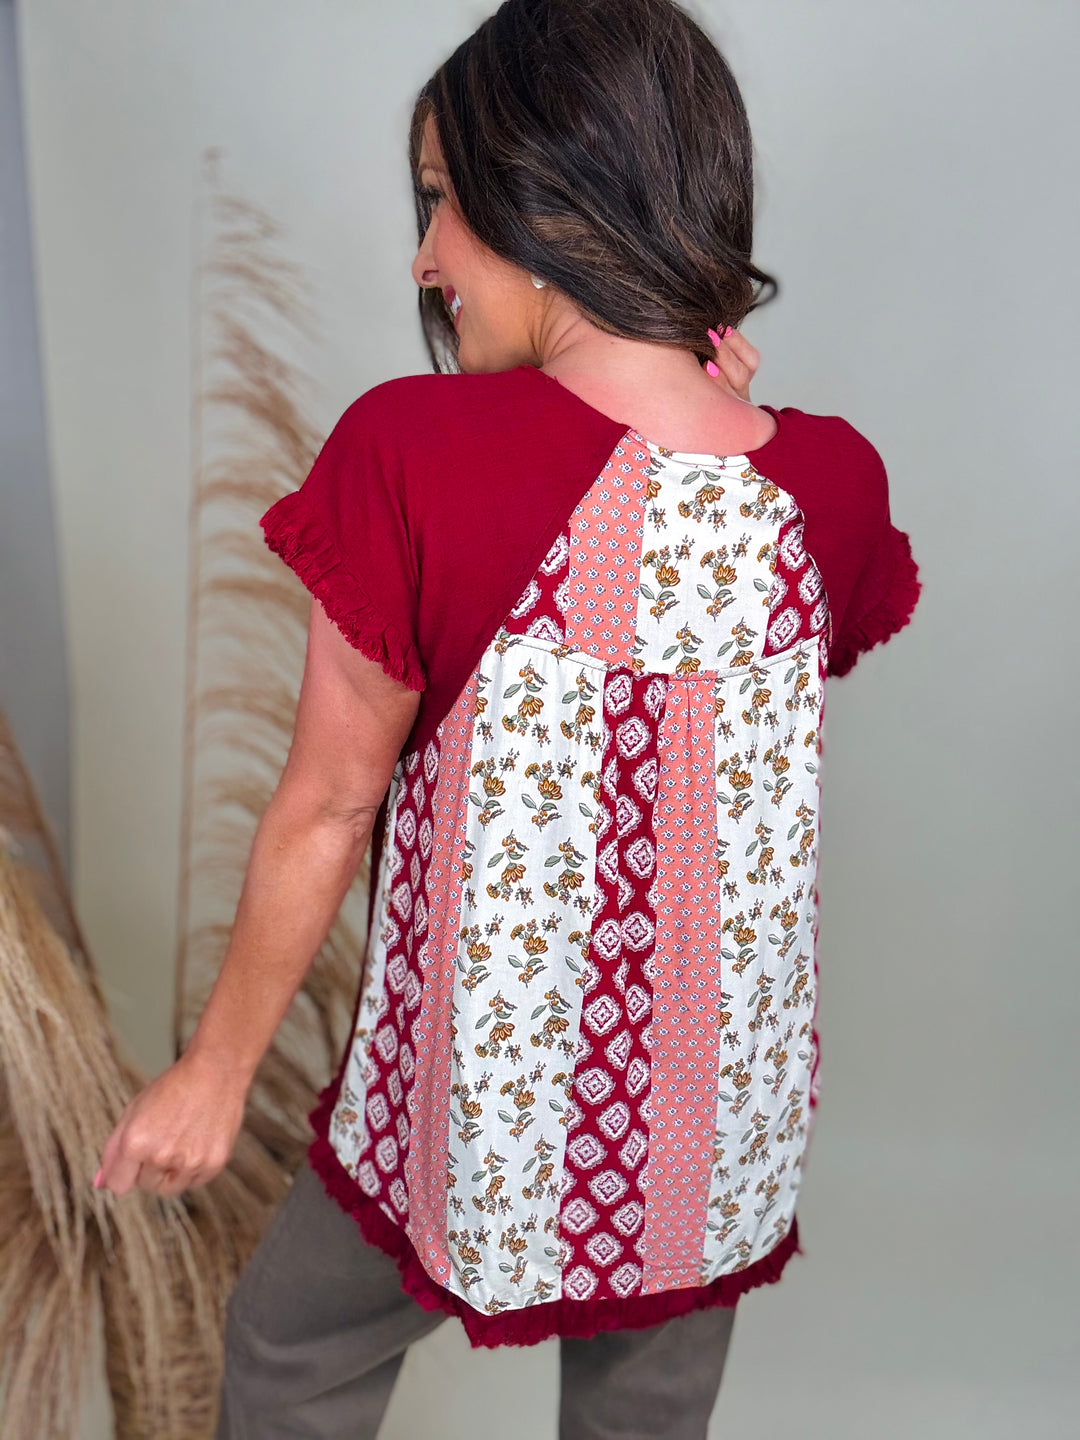 Linen Blend Scoop Neck Shirt, Frayed Hem & Mixed Print Back - 2 Color Options - Available Small Through Extended Sizes